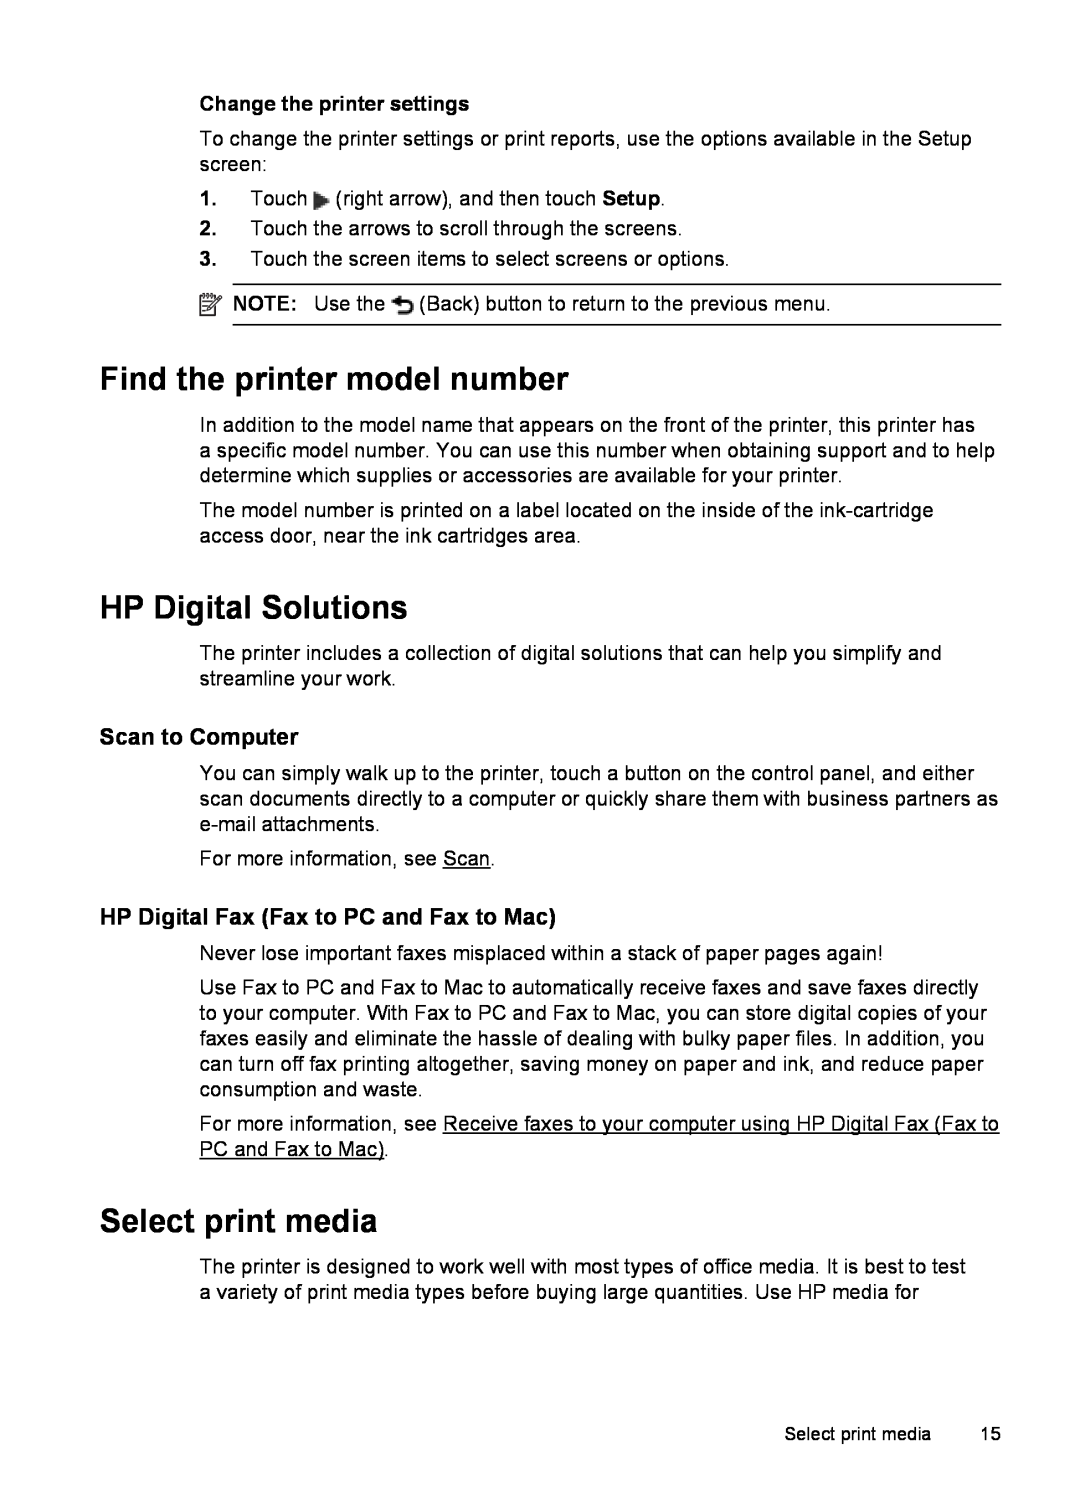 HP 6600 - H7 manual Find the printer model number, HP Digital Solutions, Select print media, Scan to Computer 